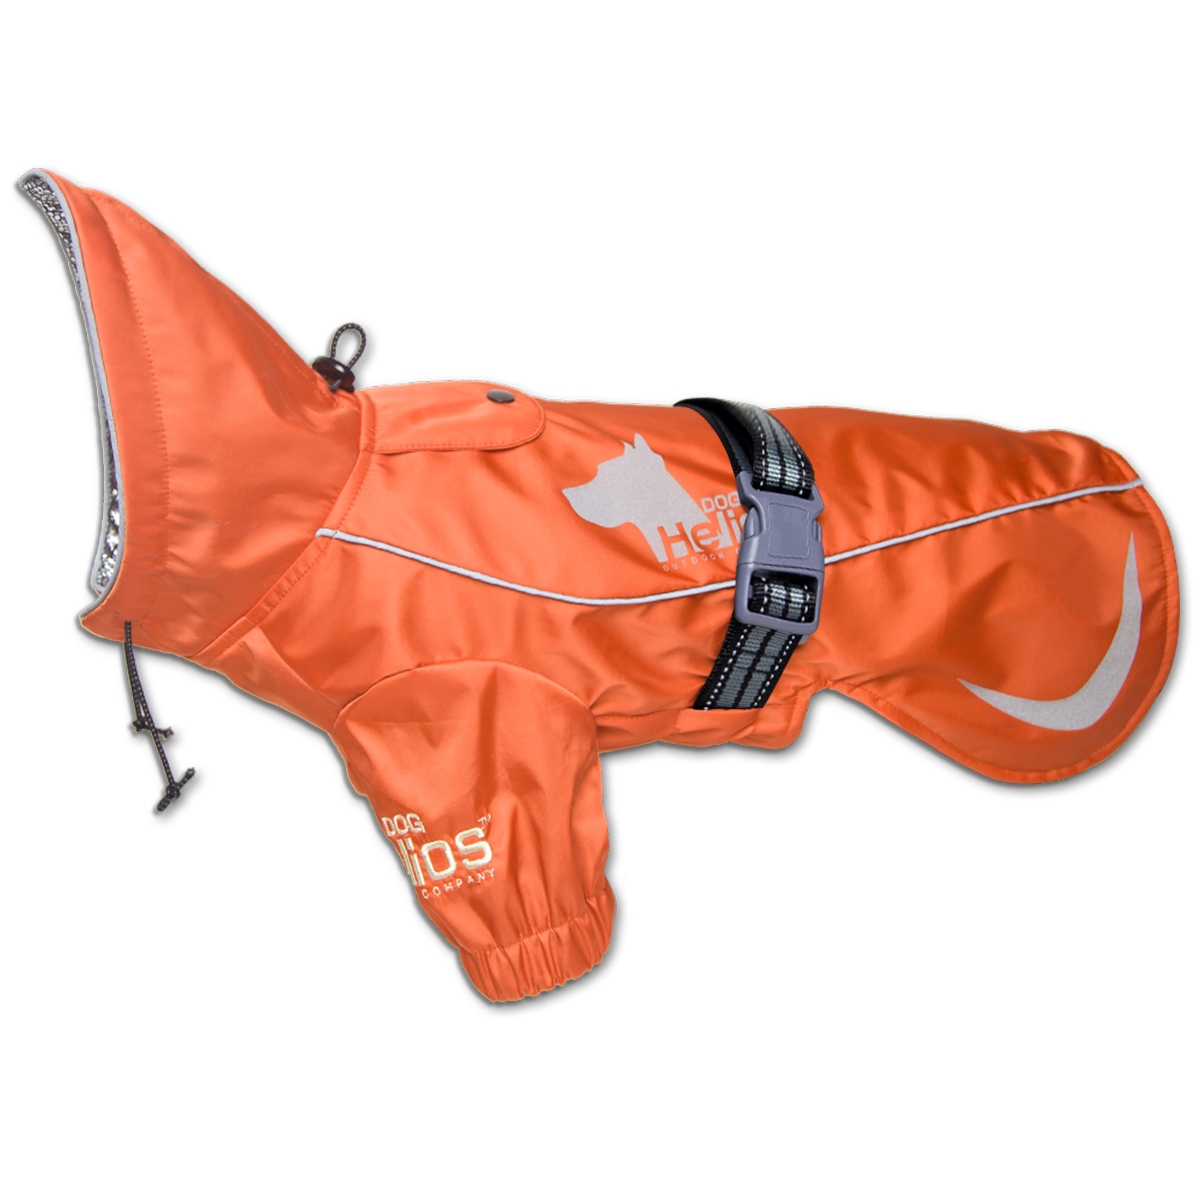 Picture of Dog Helios JKHL16ORMD Ice-Breaker Extendable Hooded Dog Coat with Heat Reflective Tech - Orange - Medium